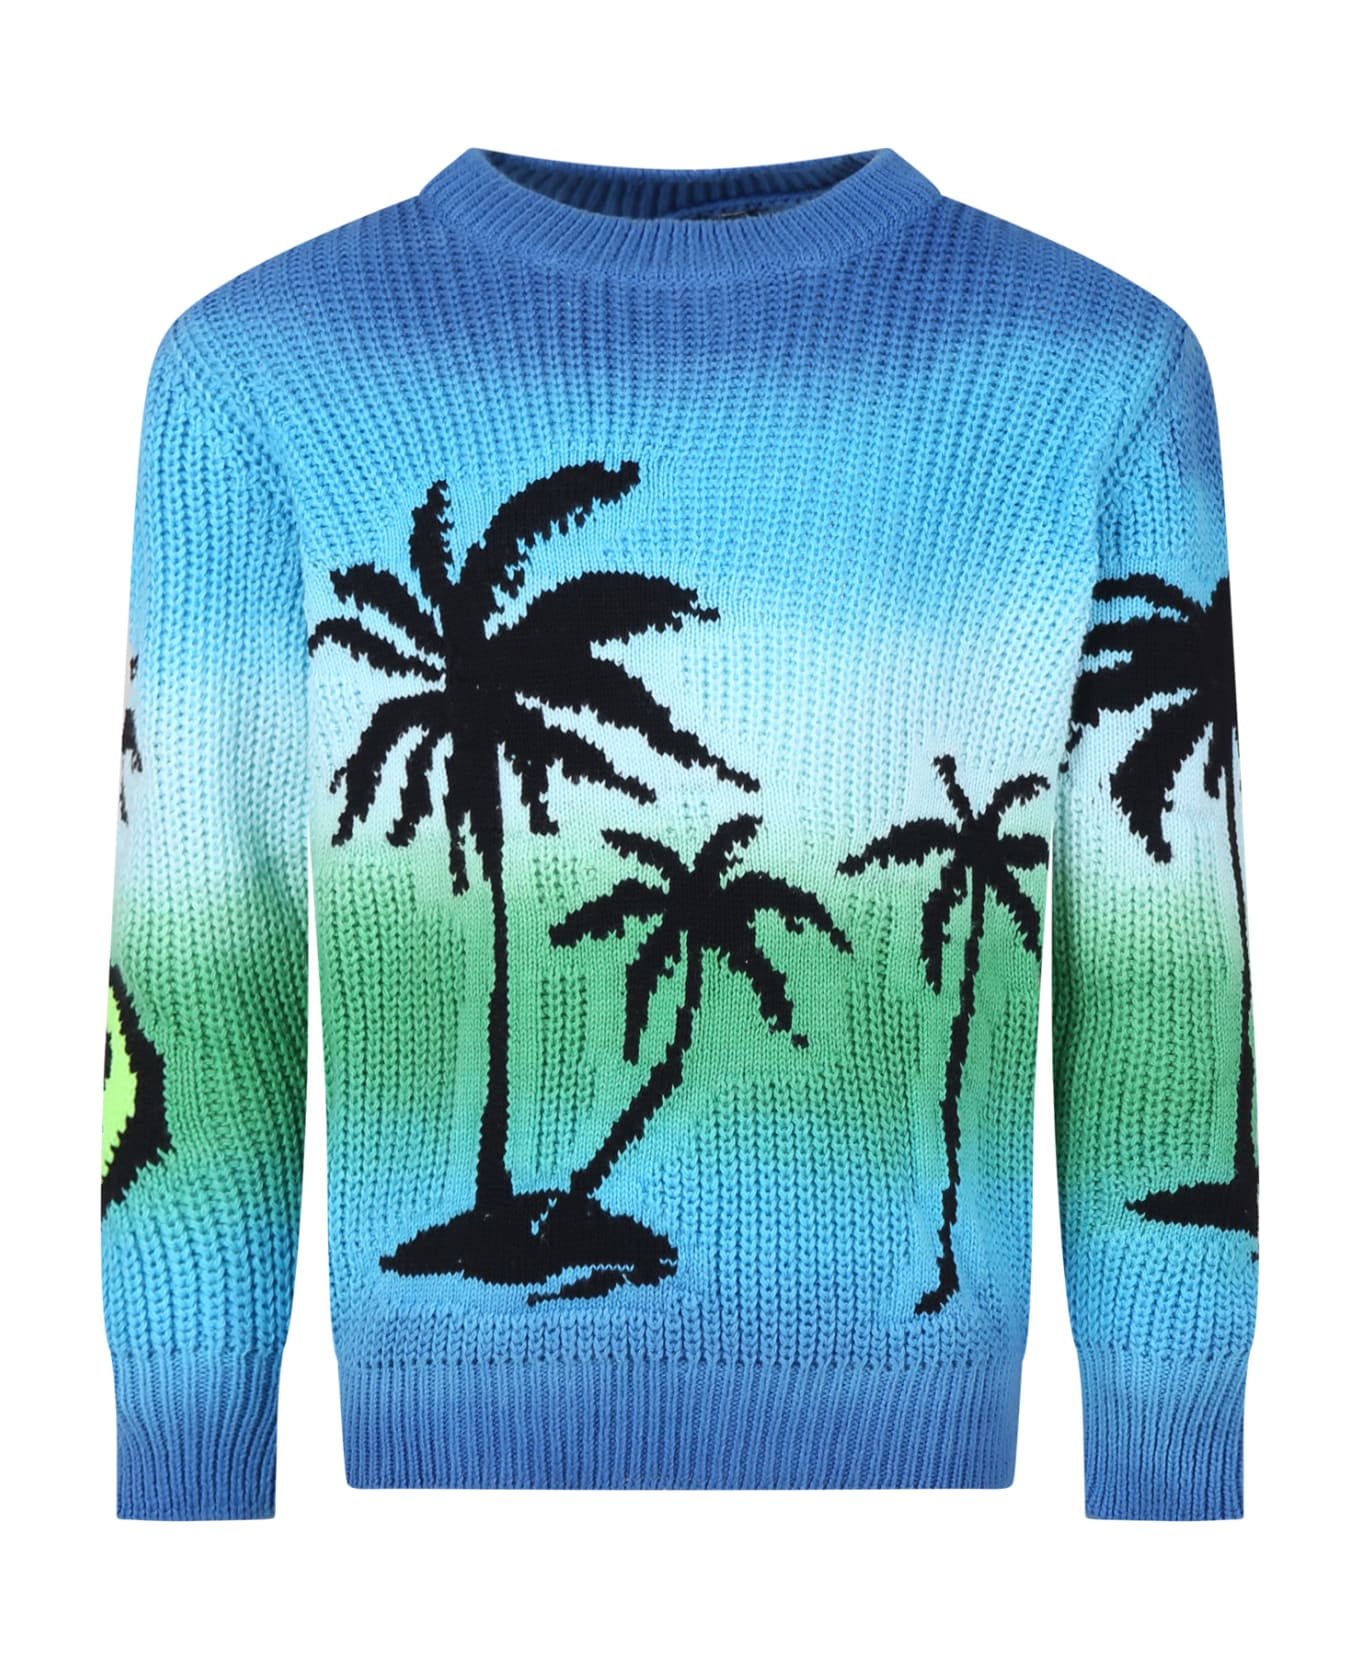 Barrow Light Blue Cotton Sweater For Kids With Smiley And Palm Trees - Turchese/Turquoise